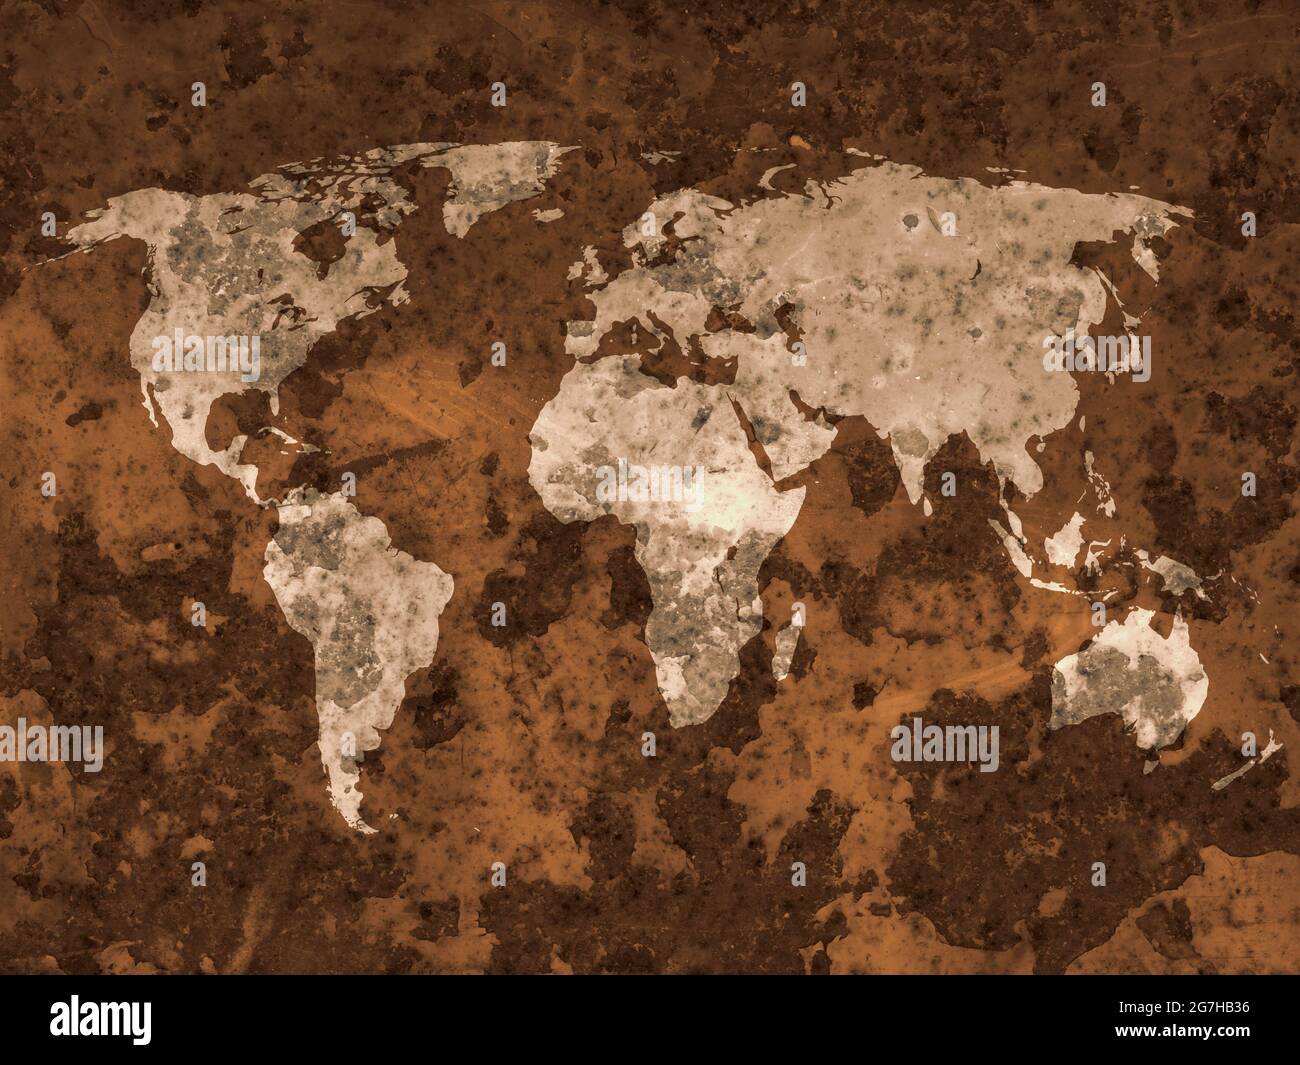 Grunge world map made with a planisphere overlaid with grungy elements, dark seas and light lands version - Ancient world wallpaper Stock Photo